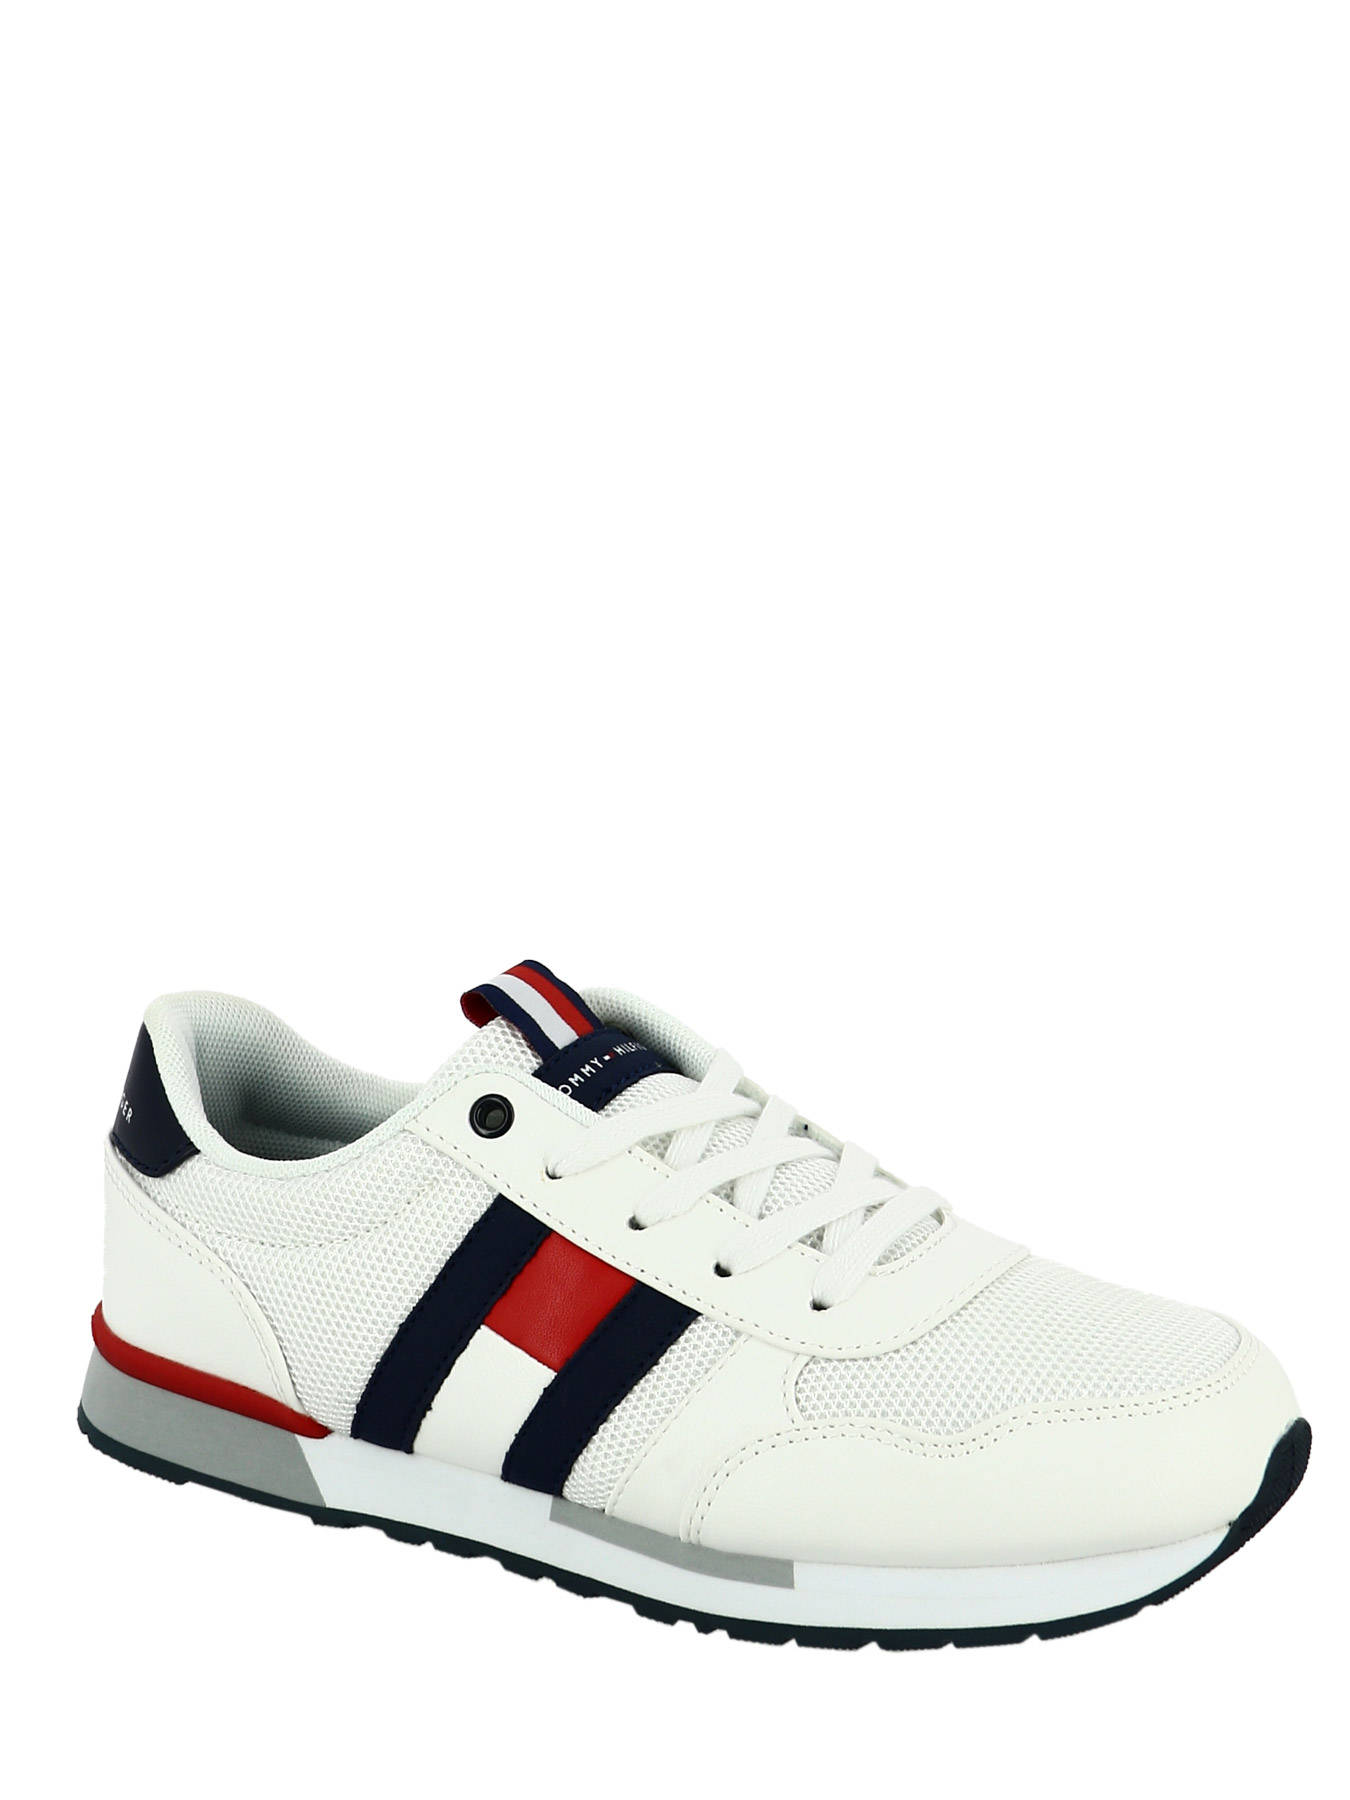 price of tommy hilfiger shoes